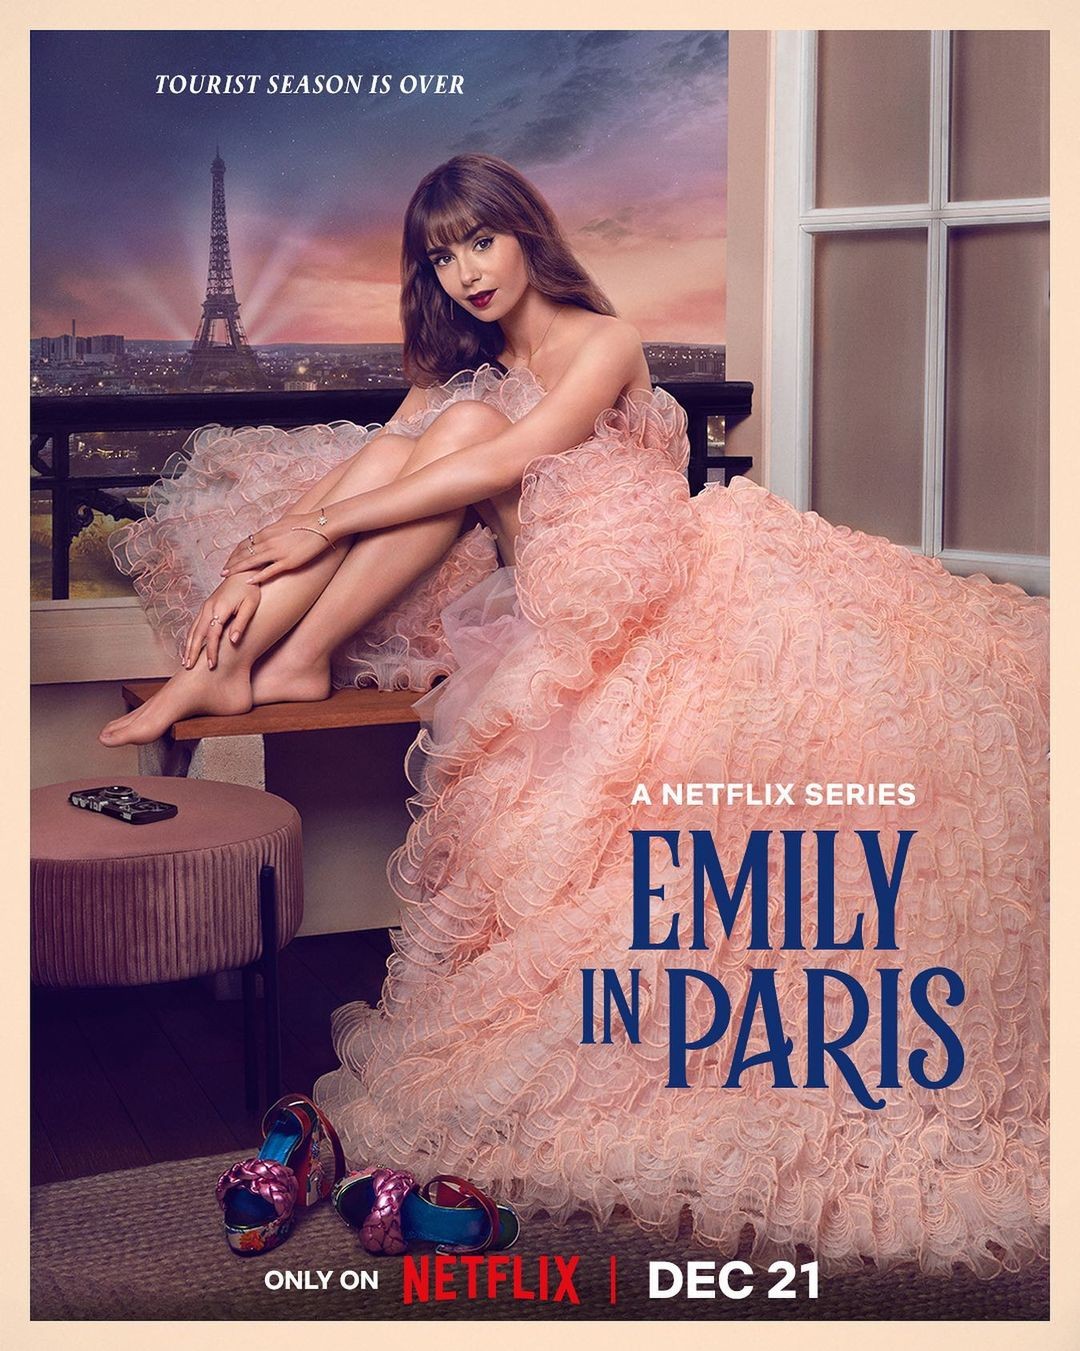 Emily's Age in 'Emily in Paris' - How Old is Emily from Emily in Paris?